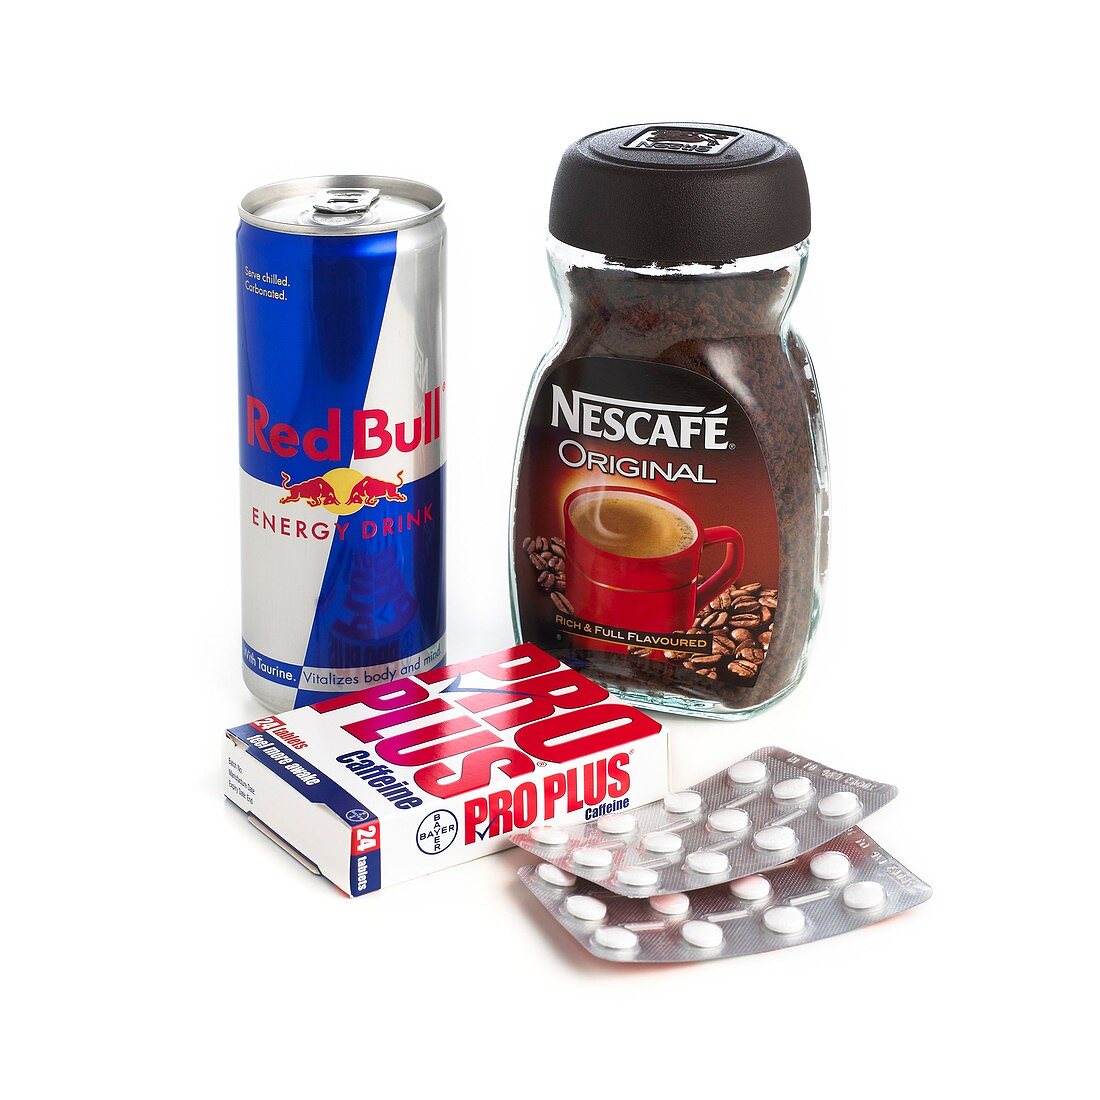 Products containing caffeine